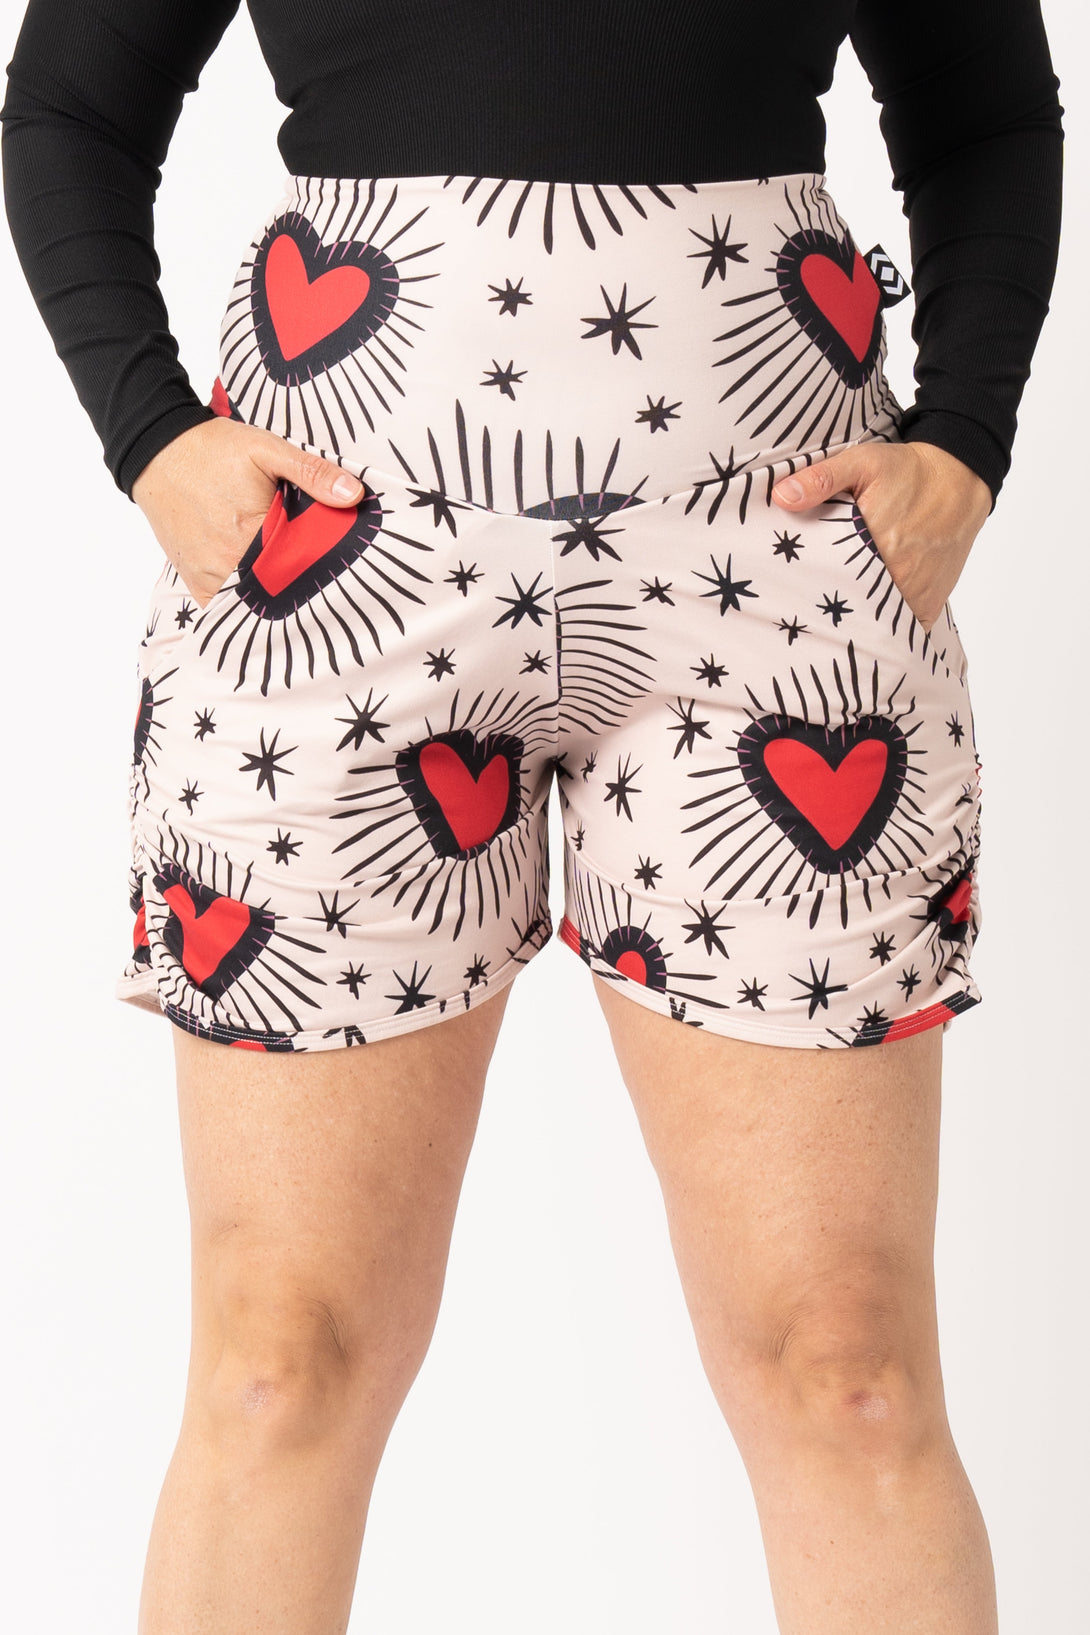 Eat Your Heart Out Soft To Touch - Jogger Shorts W/ Pockets-Activewear-Exoticathletica